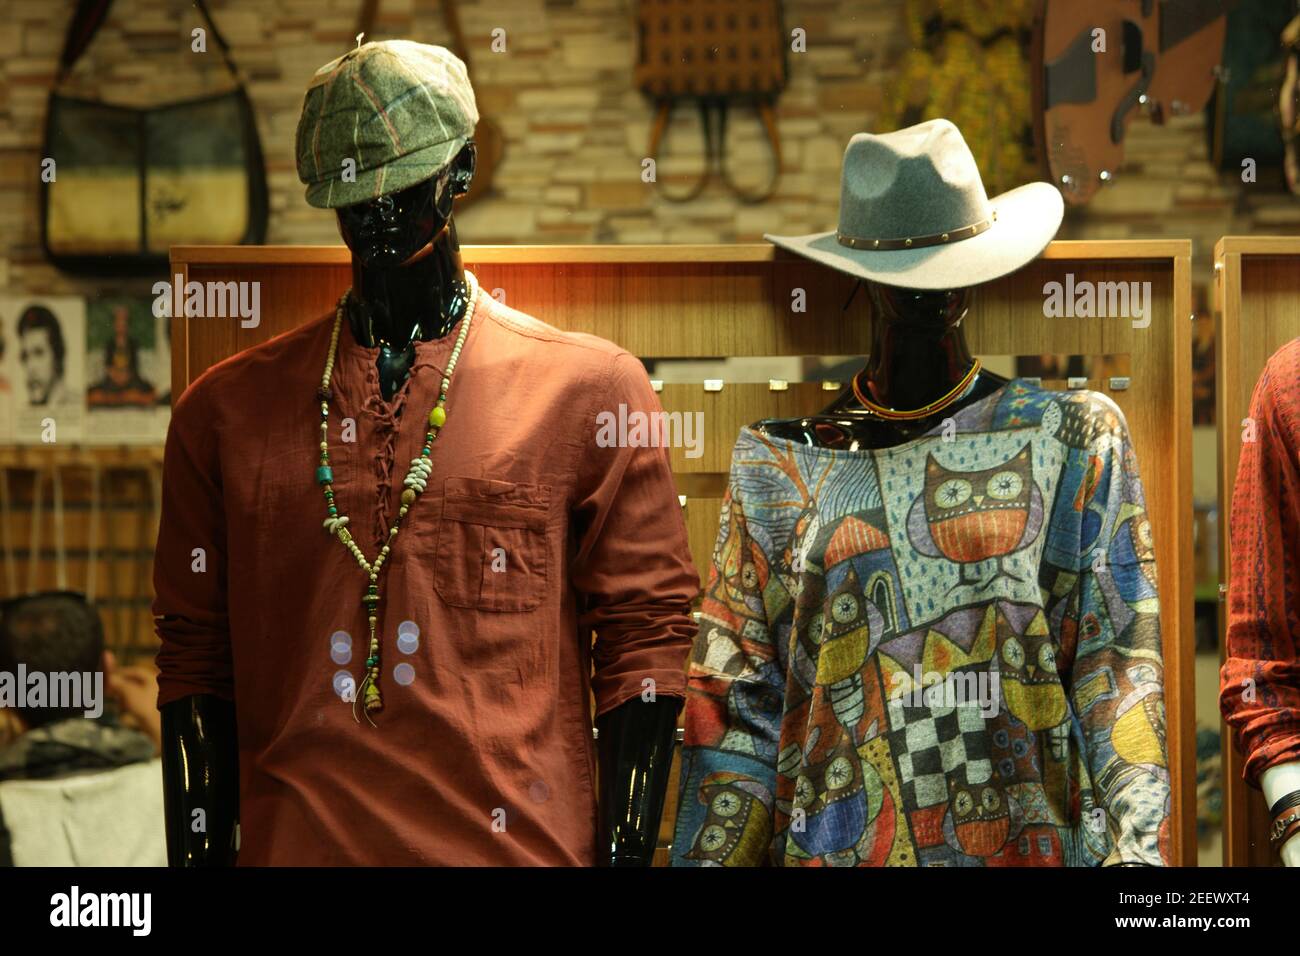 Male and female mannequins dressed in casual clothes. Stock Photo